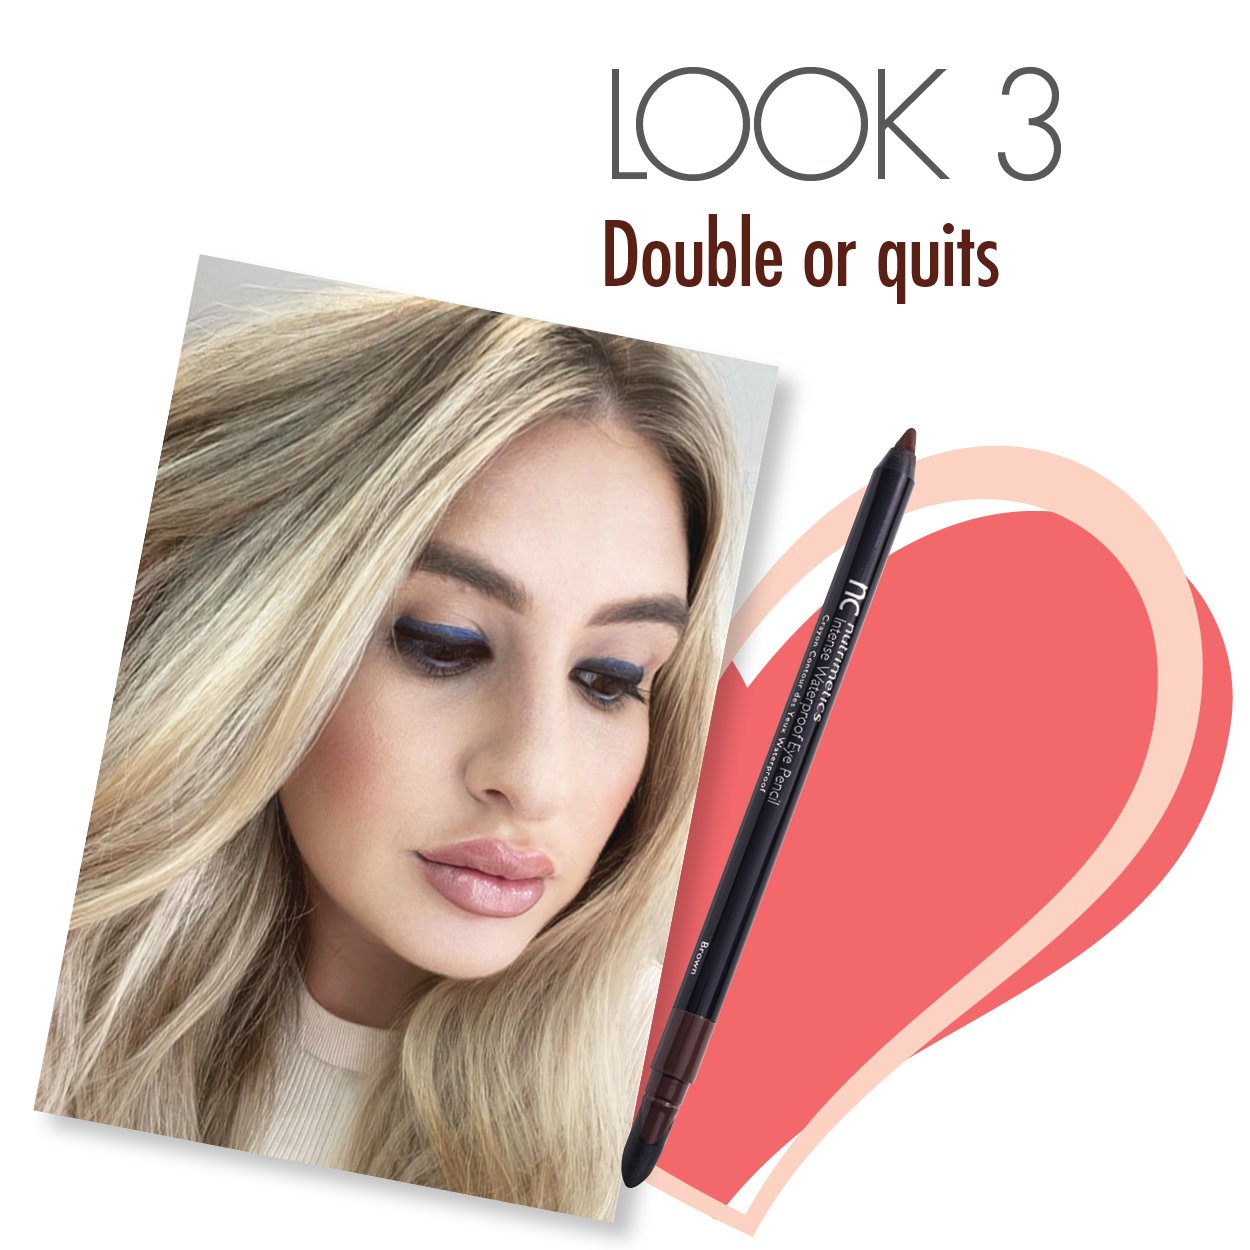 Look 3 double or quits